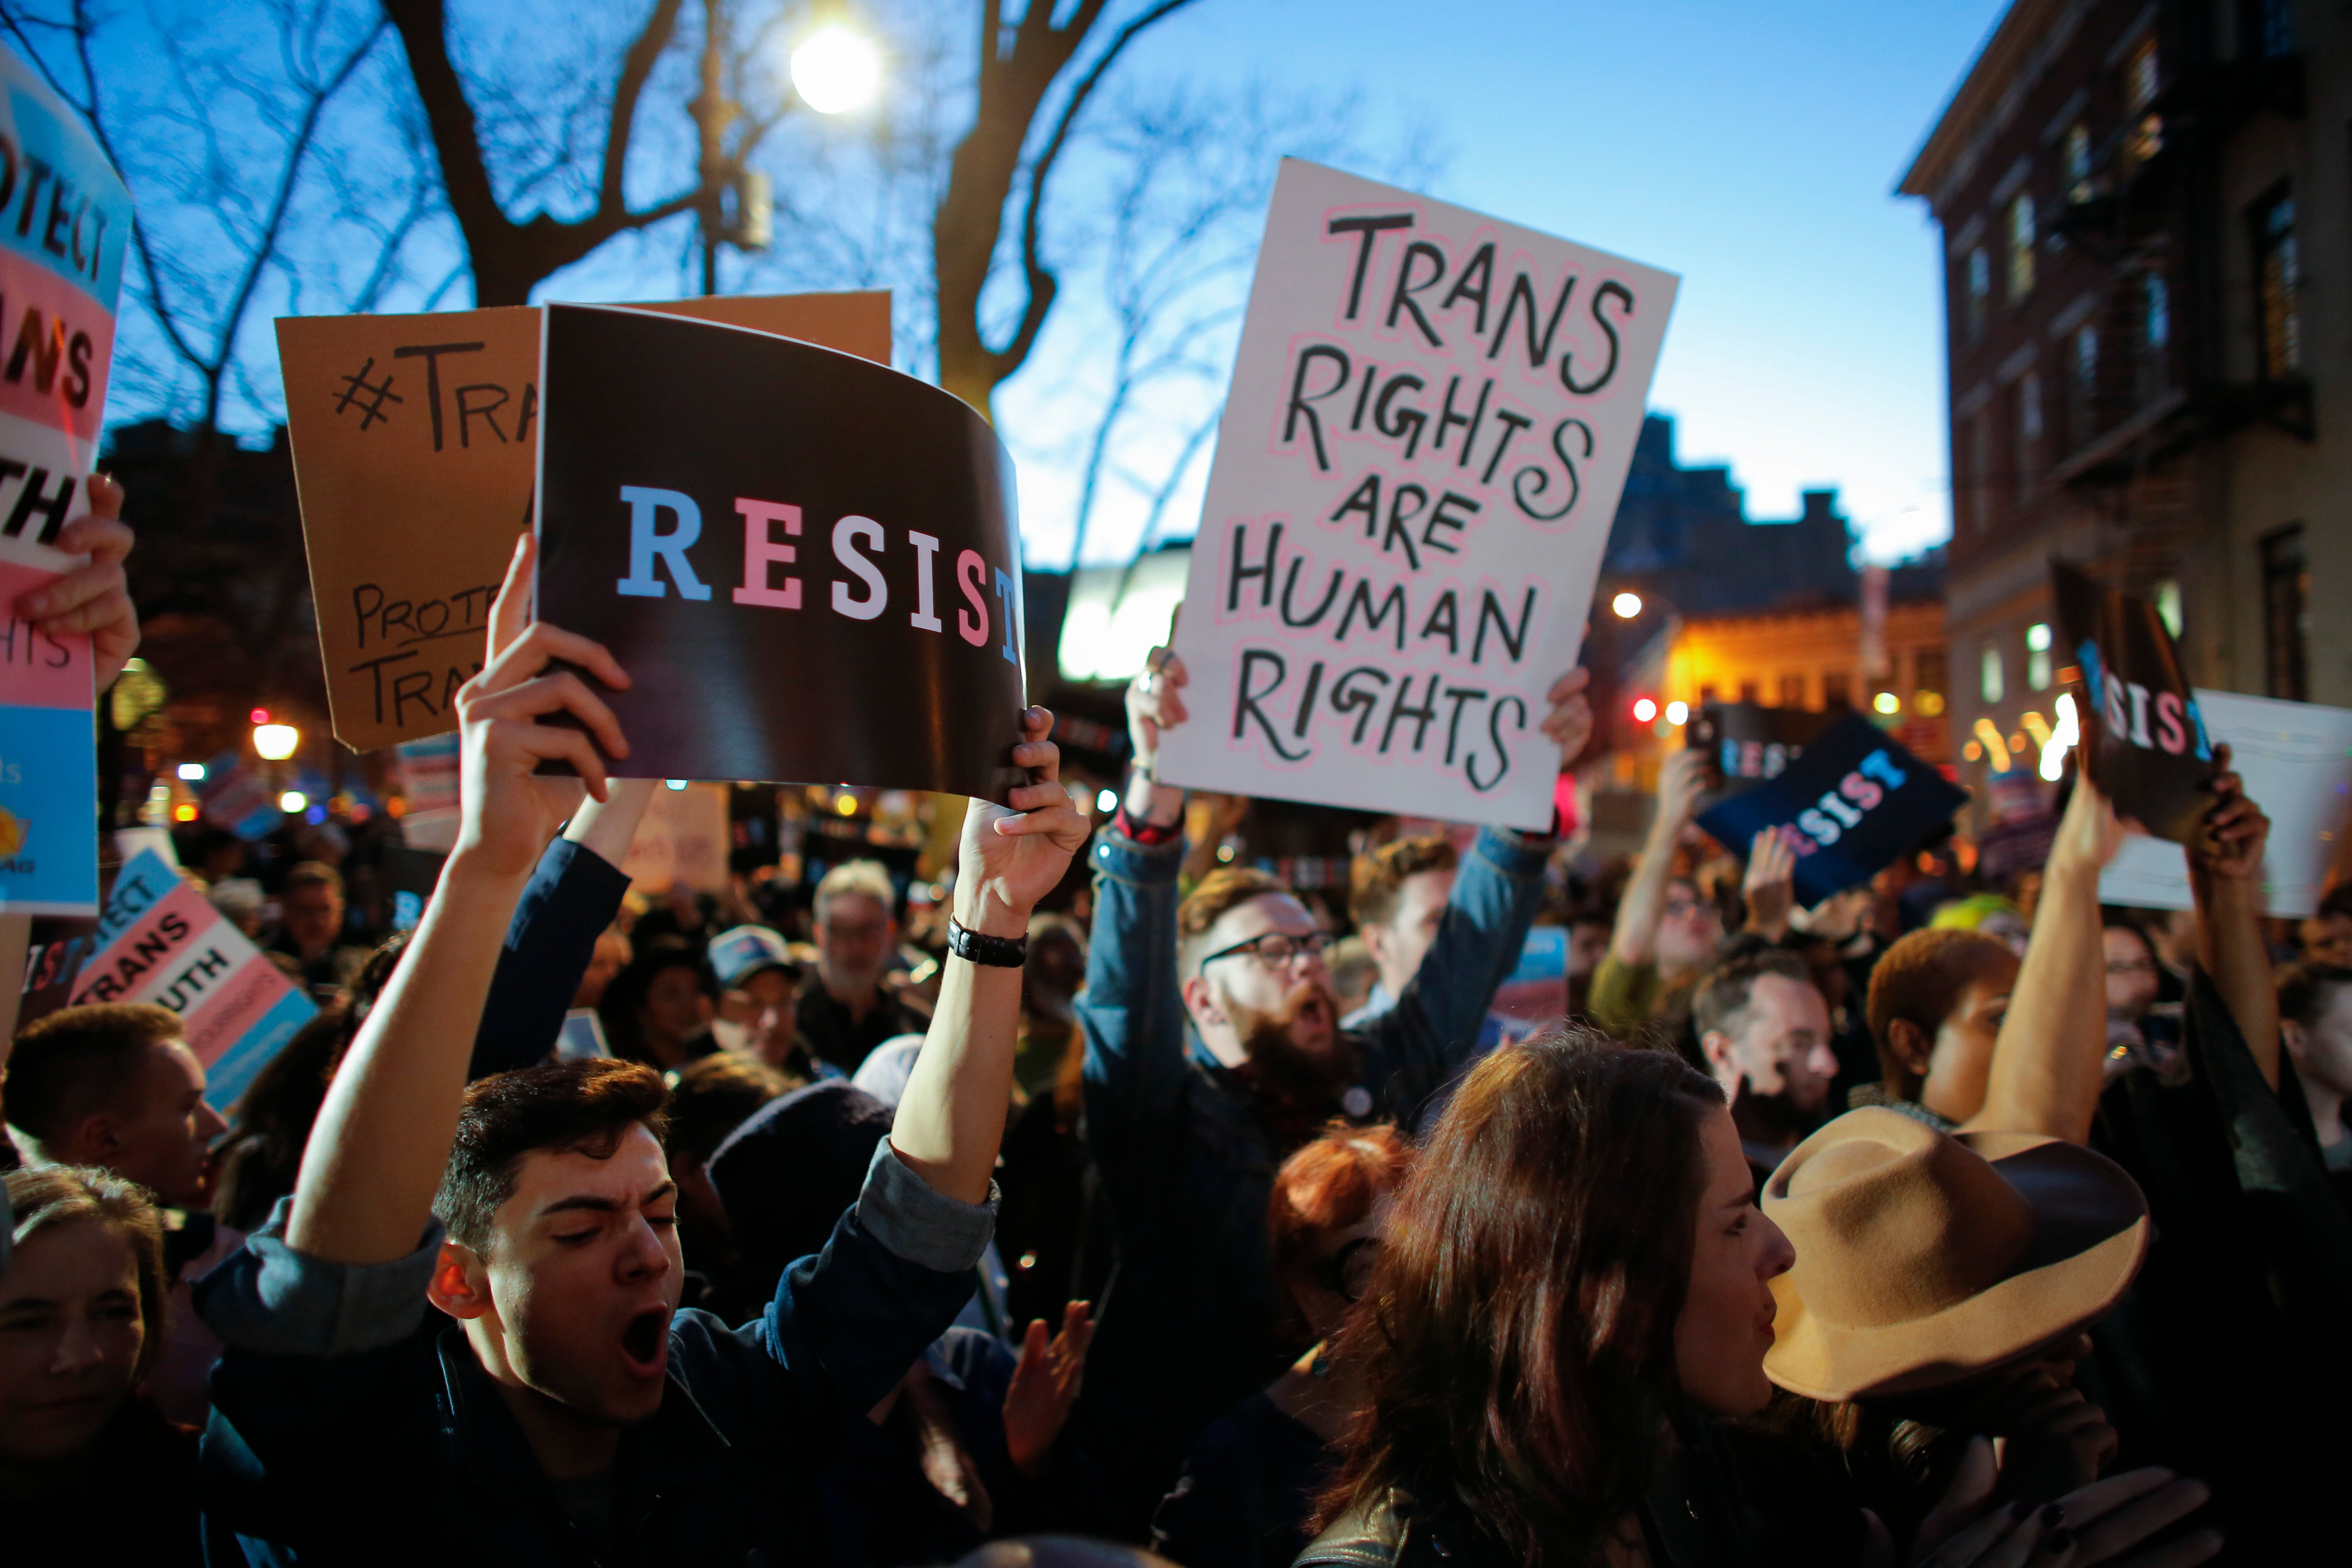 Trans individuals need their voices heard more than ever